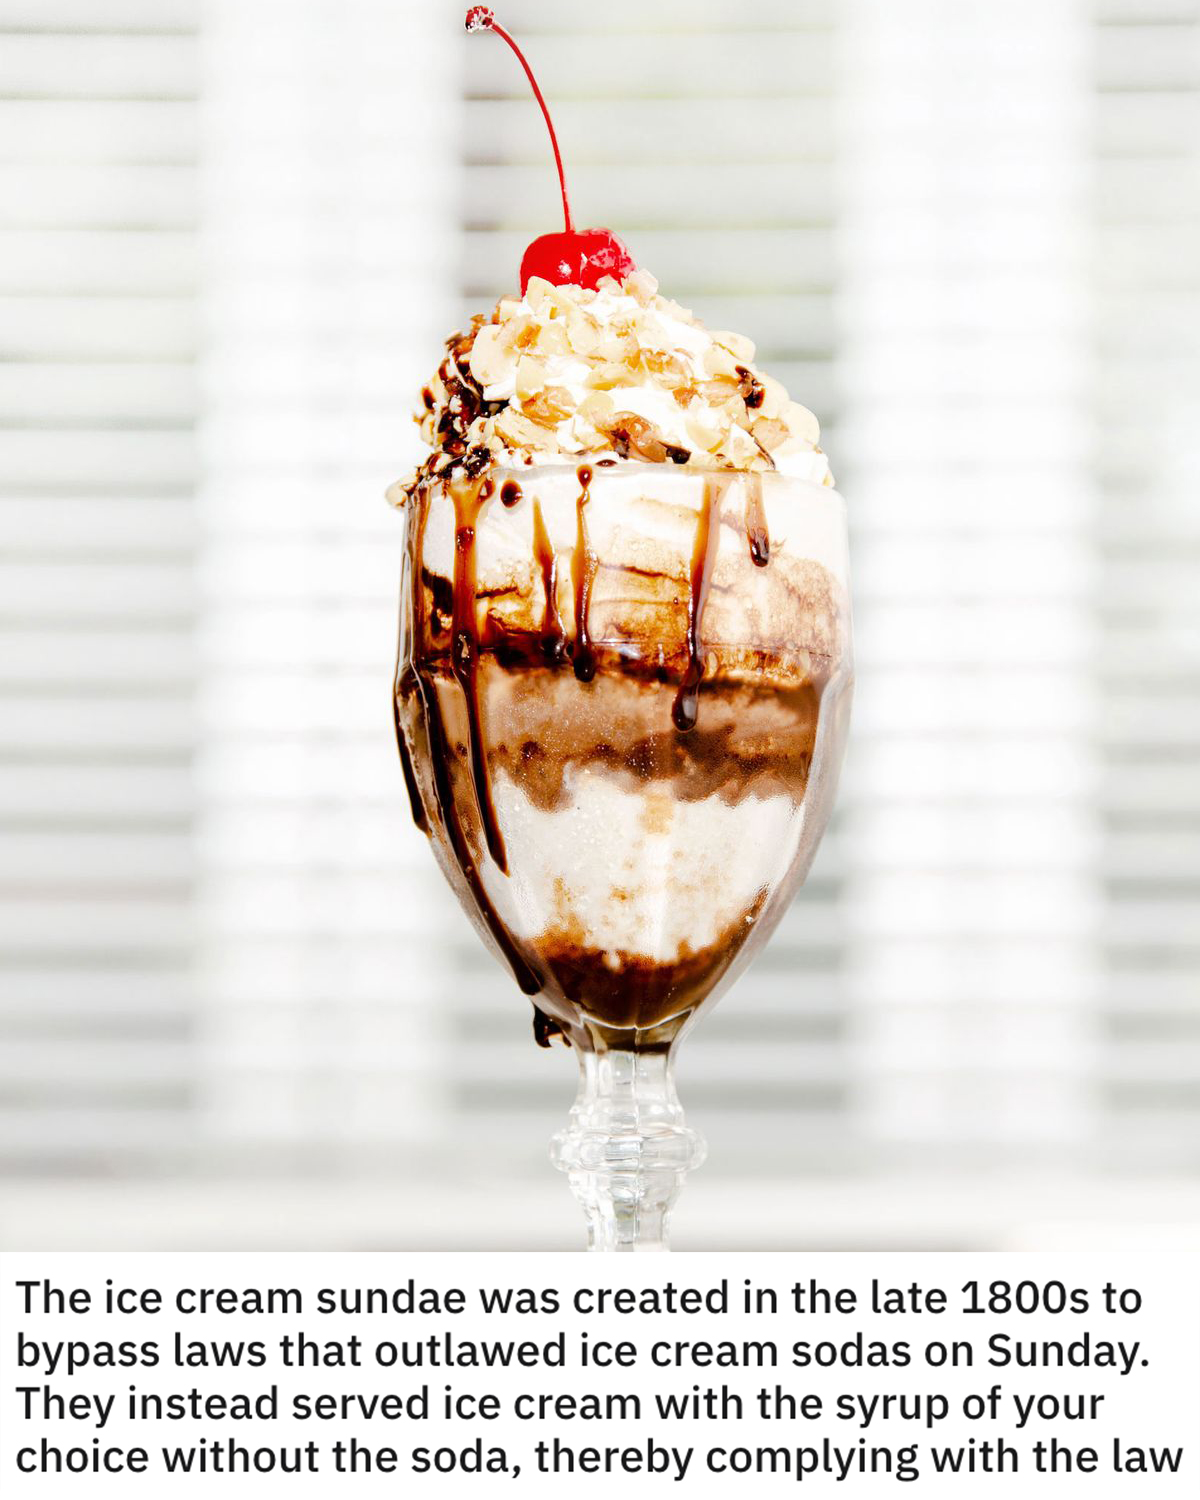 funny loopholes - The ice cream sundae was created in the late 1800s to bypass laws that outlawed ice cream sodas on Sunday. They instead served ice cream with the syrup of your choice without the soda, thereby complying with the law